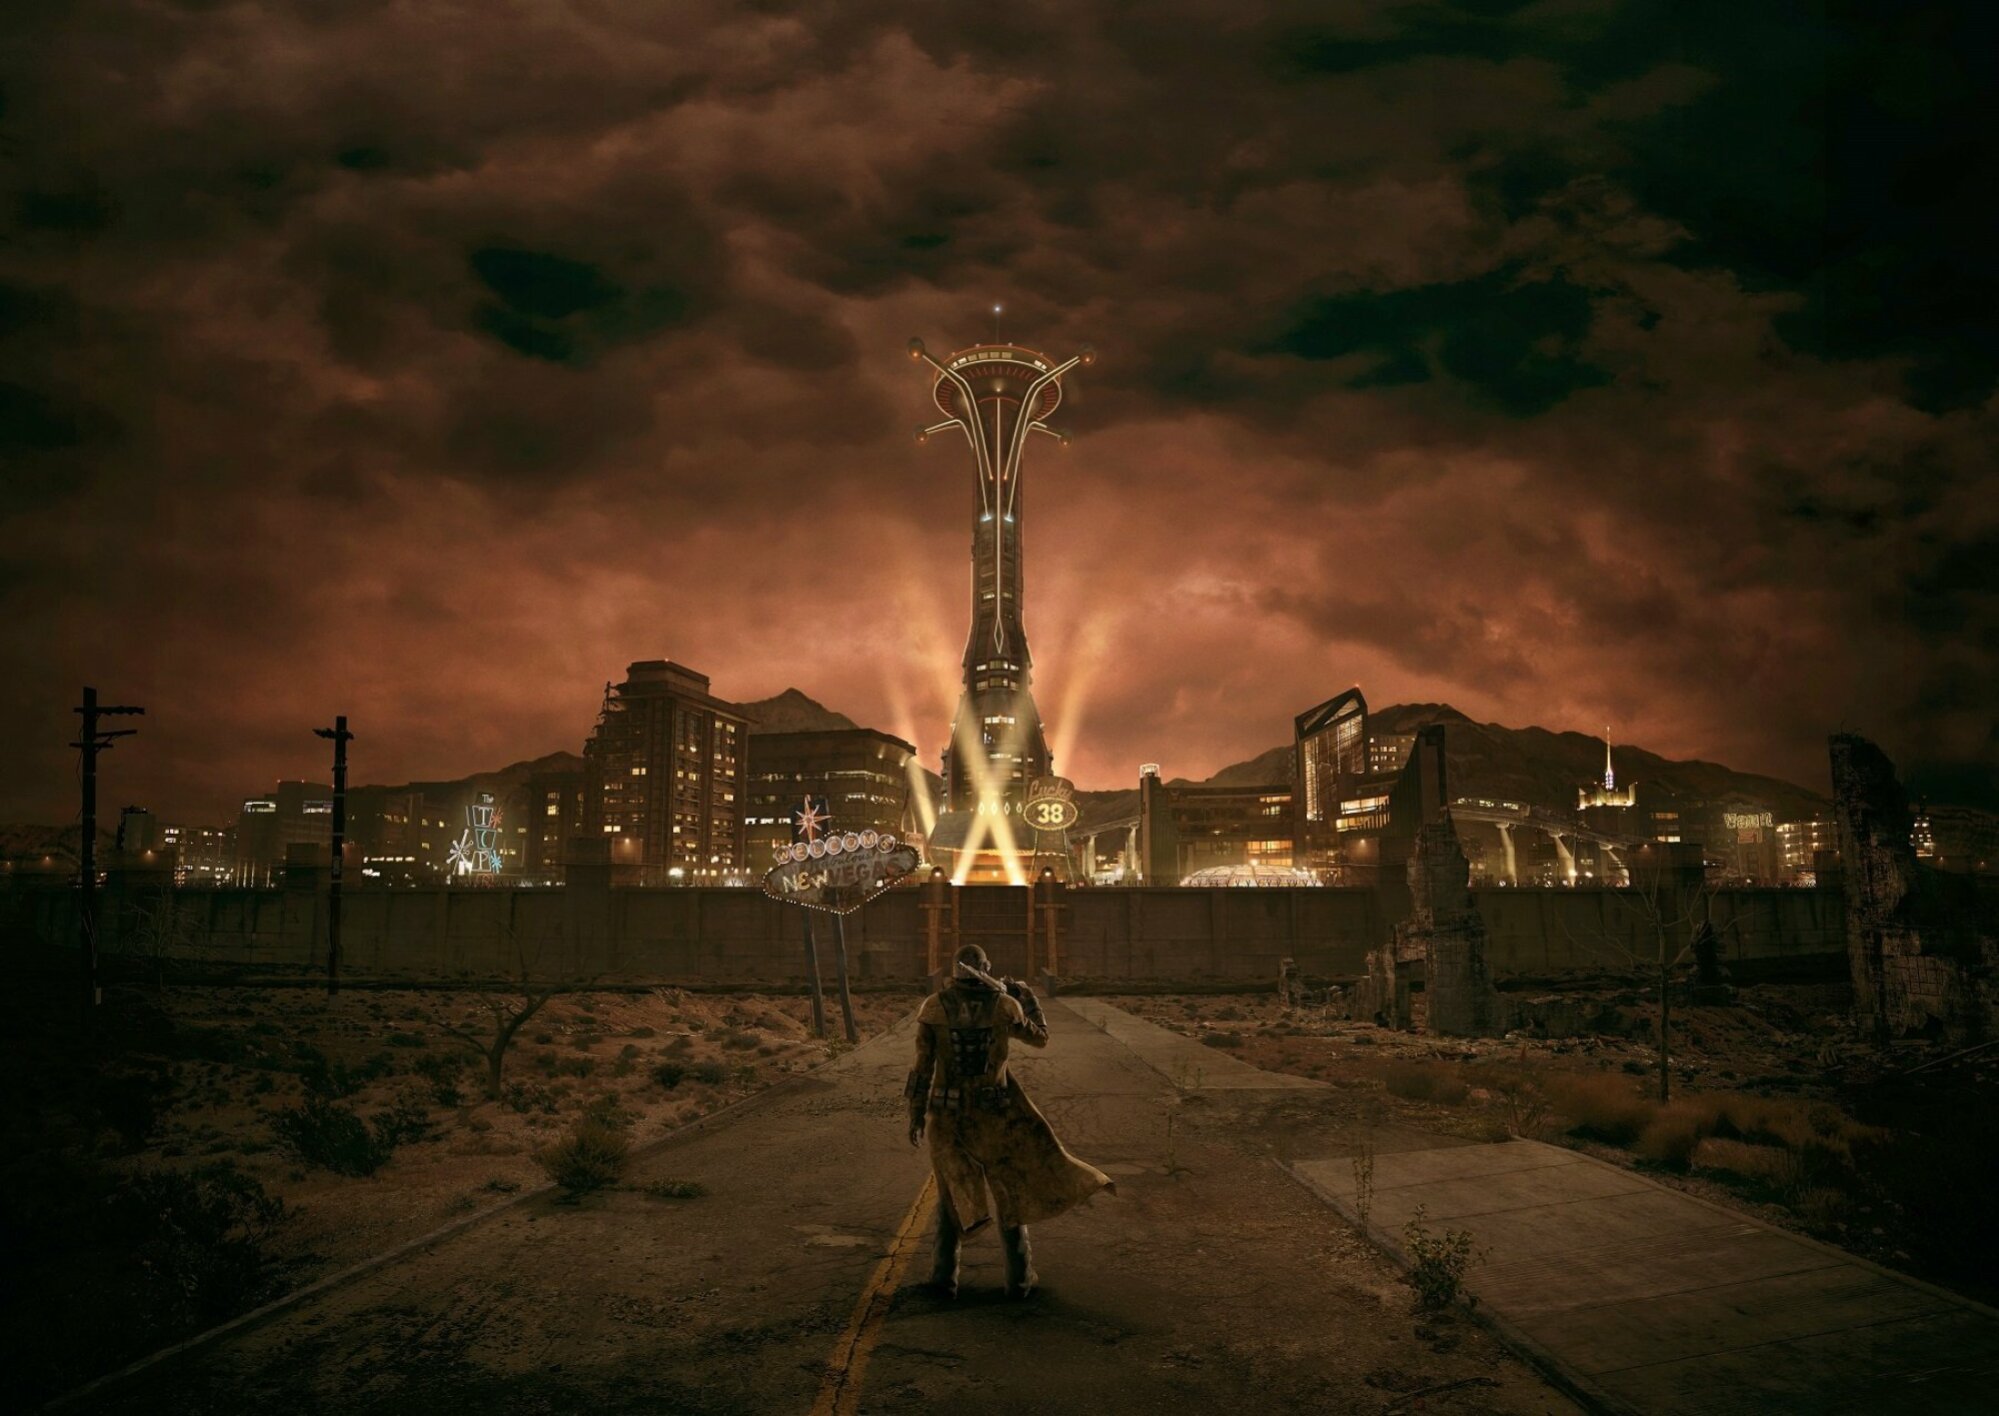 A figure in tattered clothing walks towards a glowing tower with a beacon of light under a stormy sky in a desolate, post-apocalyptic cityscape.